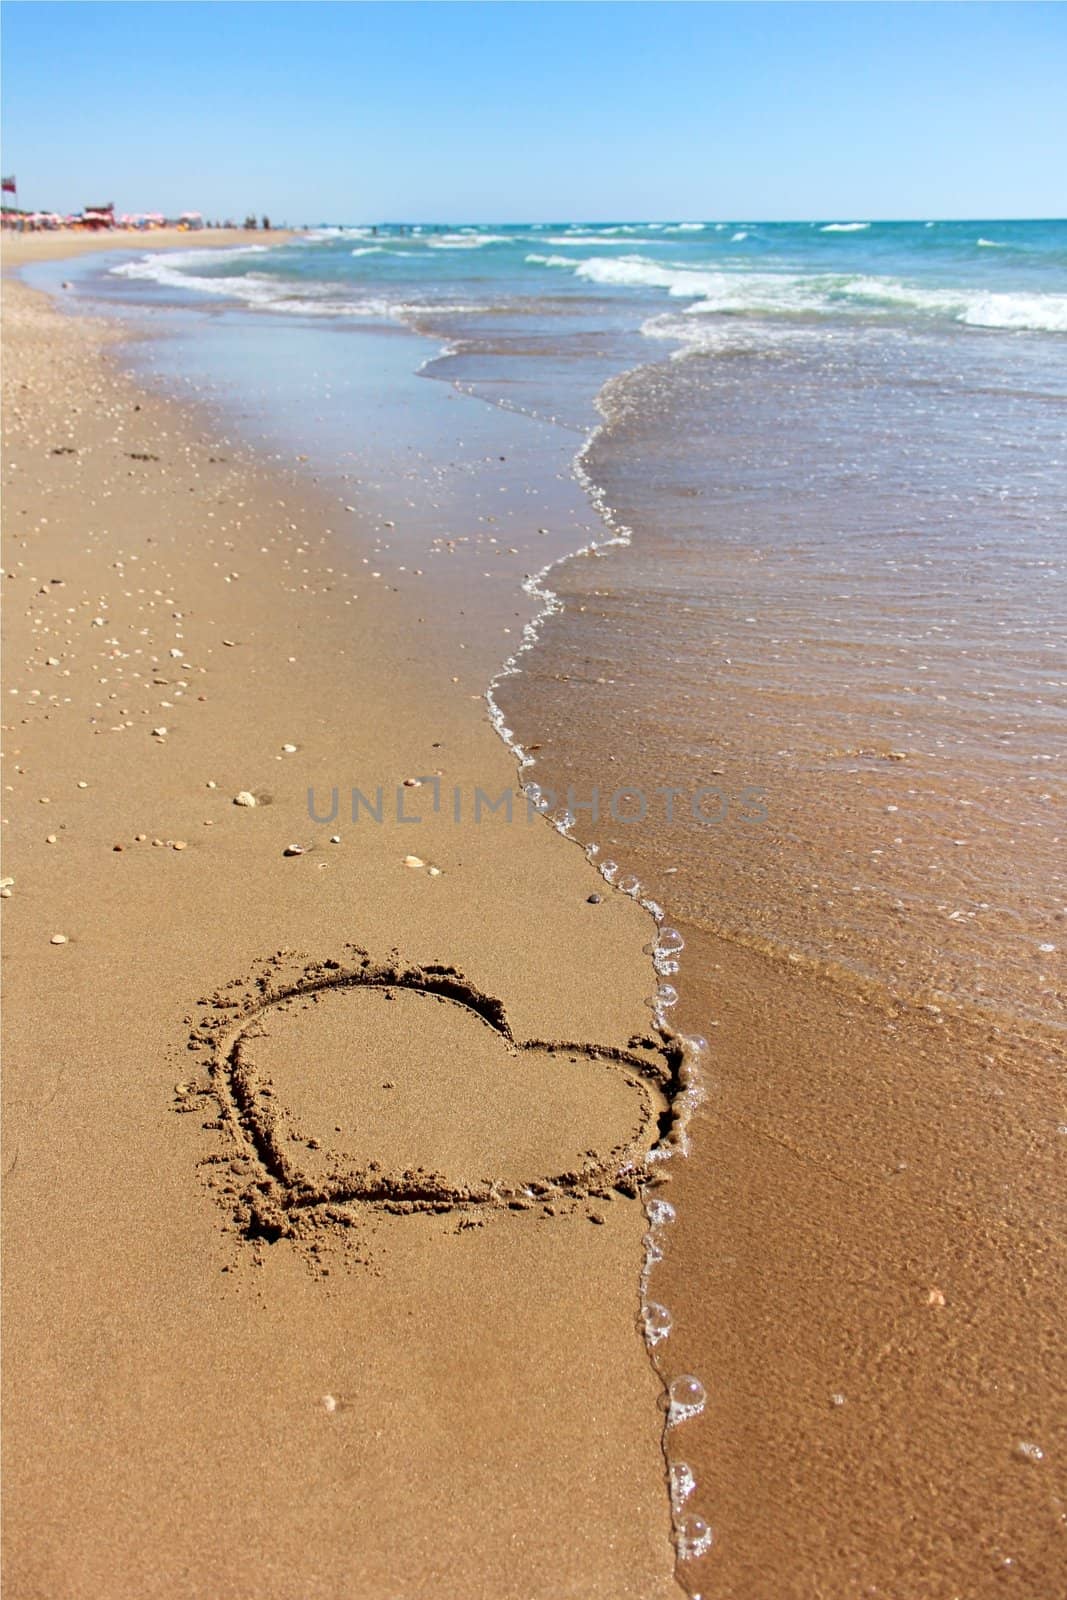 drawing a heart on sandy beaches of the Mediterranean